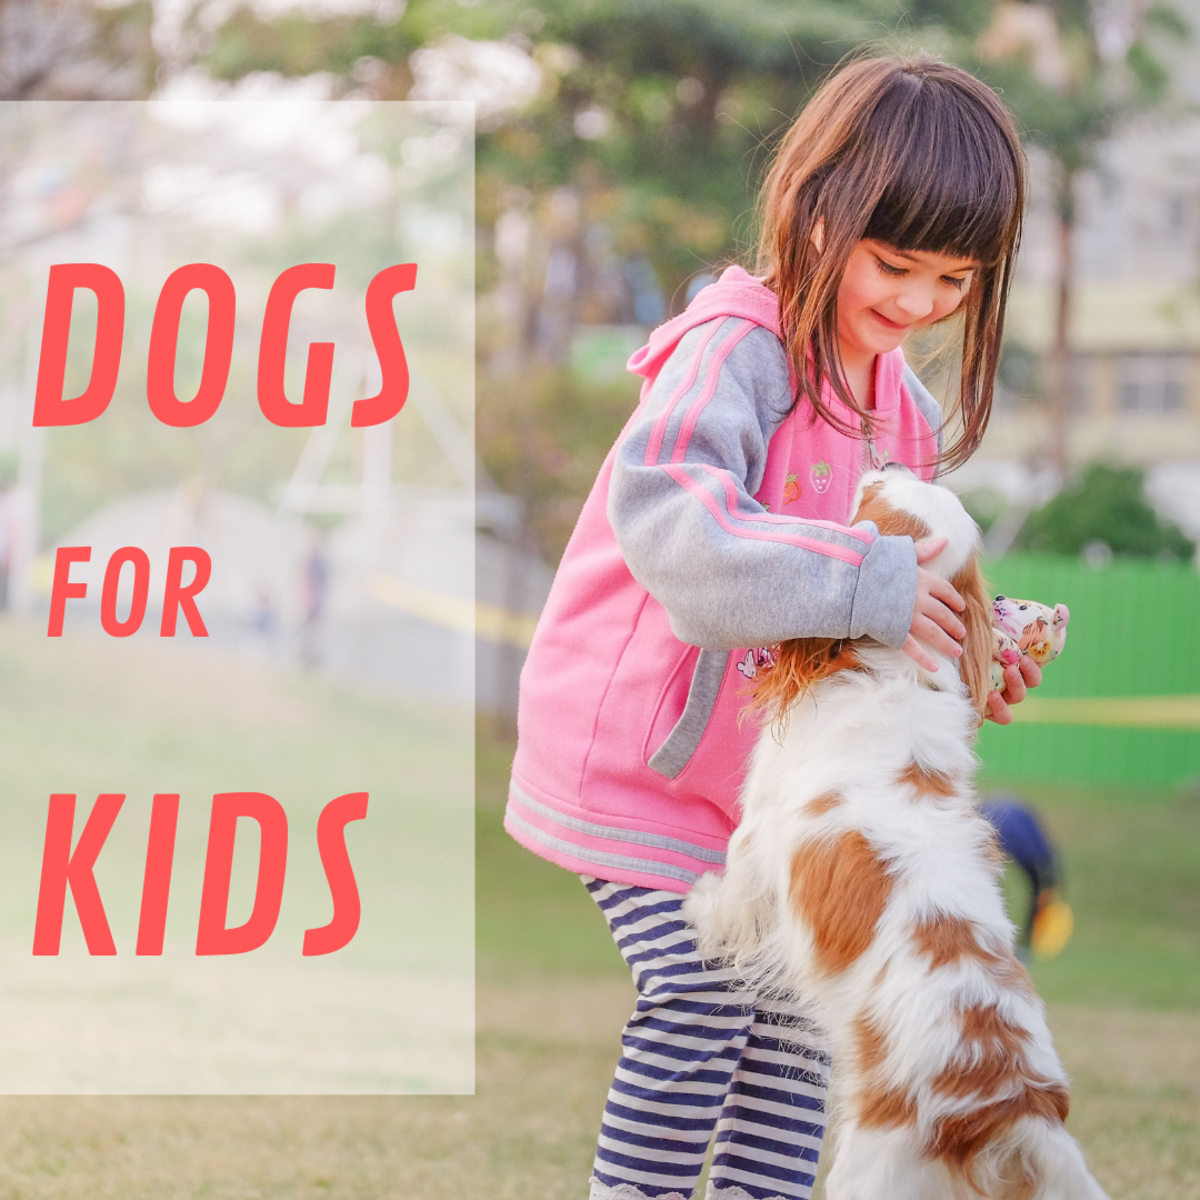 Most kids are drawn to dogs as pets.